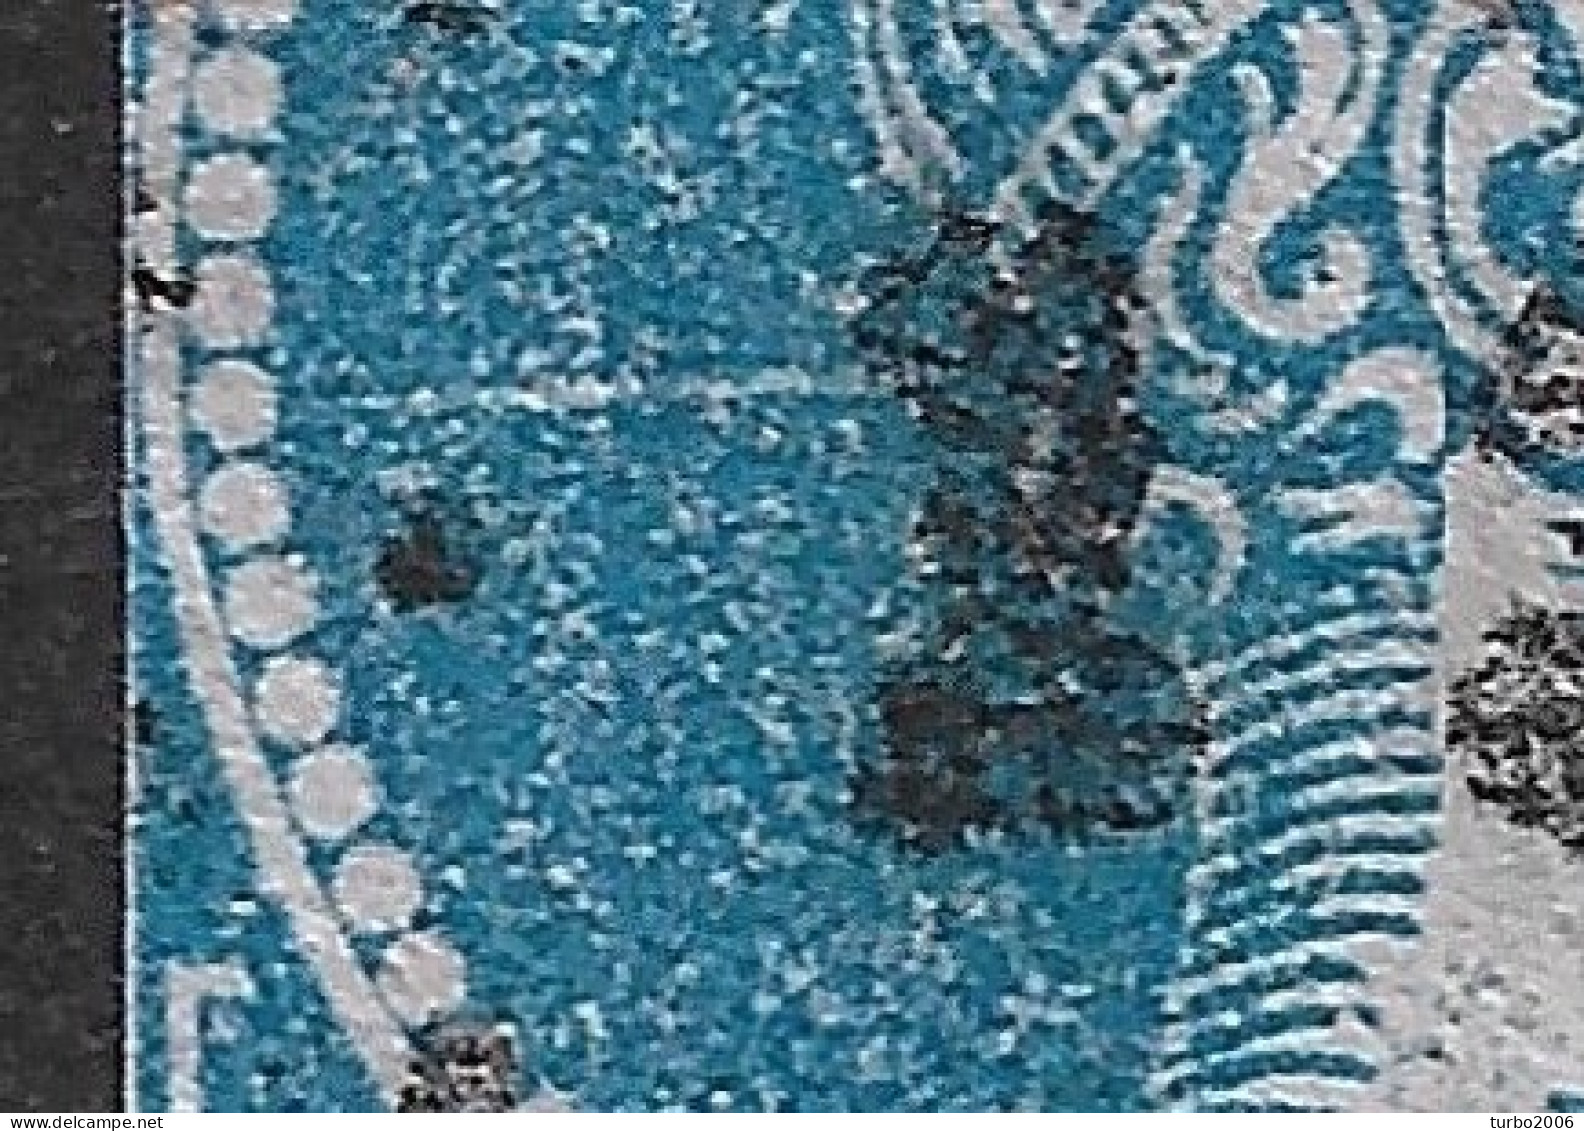 GREECE Plateflaw White Line (20F20) In 1868-69 Large Hermes Head Cleaned Plates Issue 20 L Sky Blue Vl. 39 / H 27 A - Plaatfouten En Curiosa